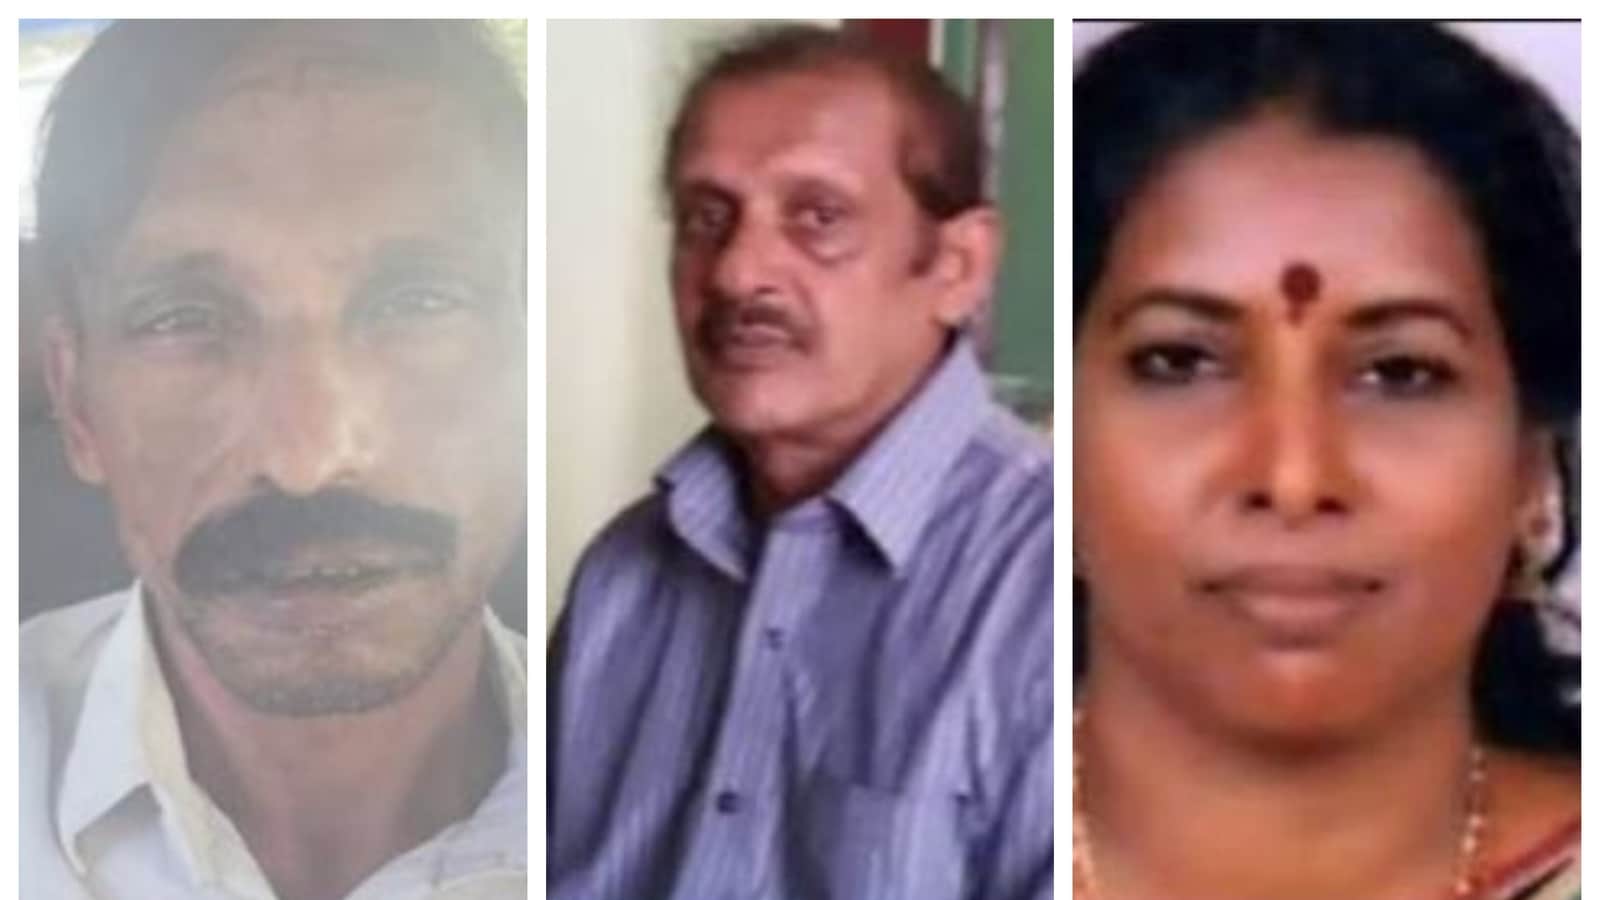 Kerala black magic, cannibalism: Who are the Kerala couple and 'sorcerer'?  | Latest News India - Hindustan Times